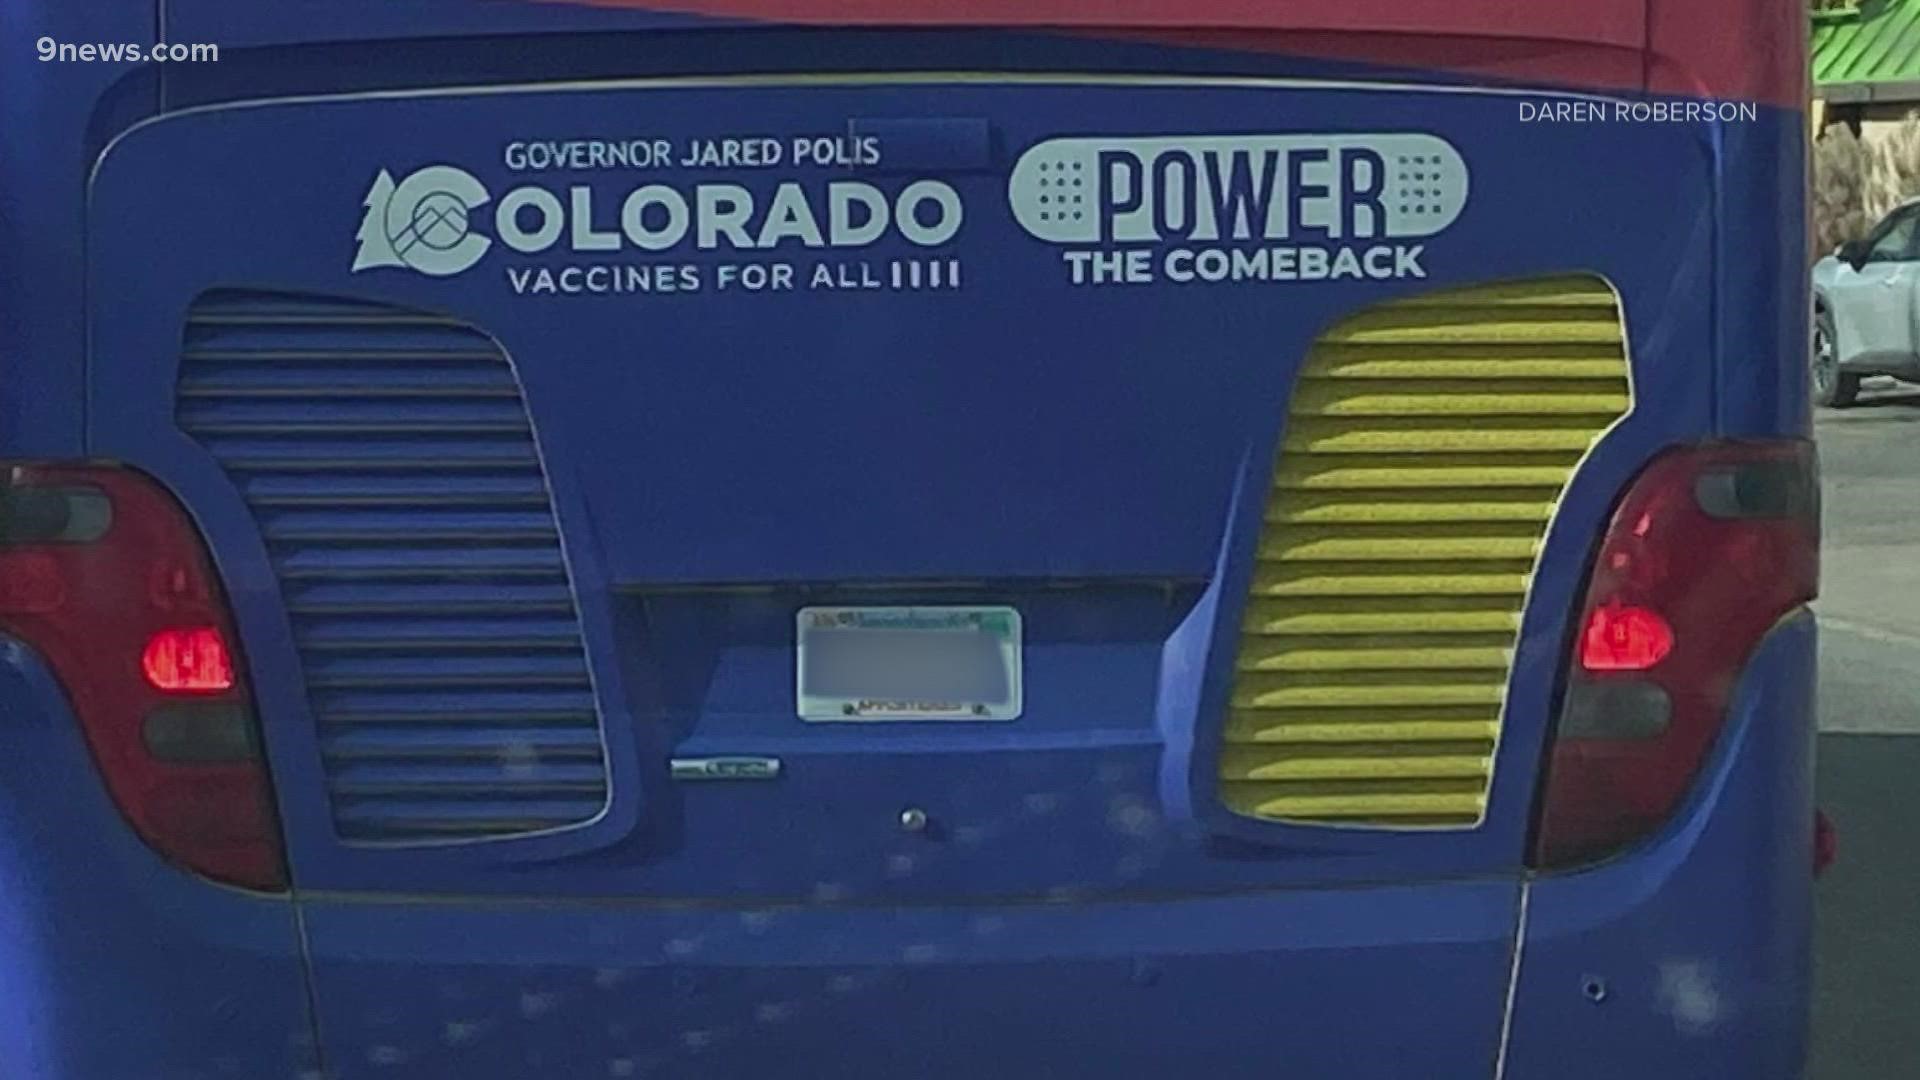 Ronna and Daren in Fort Collins wanted to know why COVID vaccine buses have out-of-state plates. Email your questions, about any local topic, to Next@9news.com.